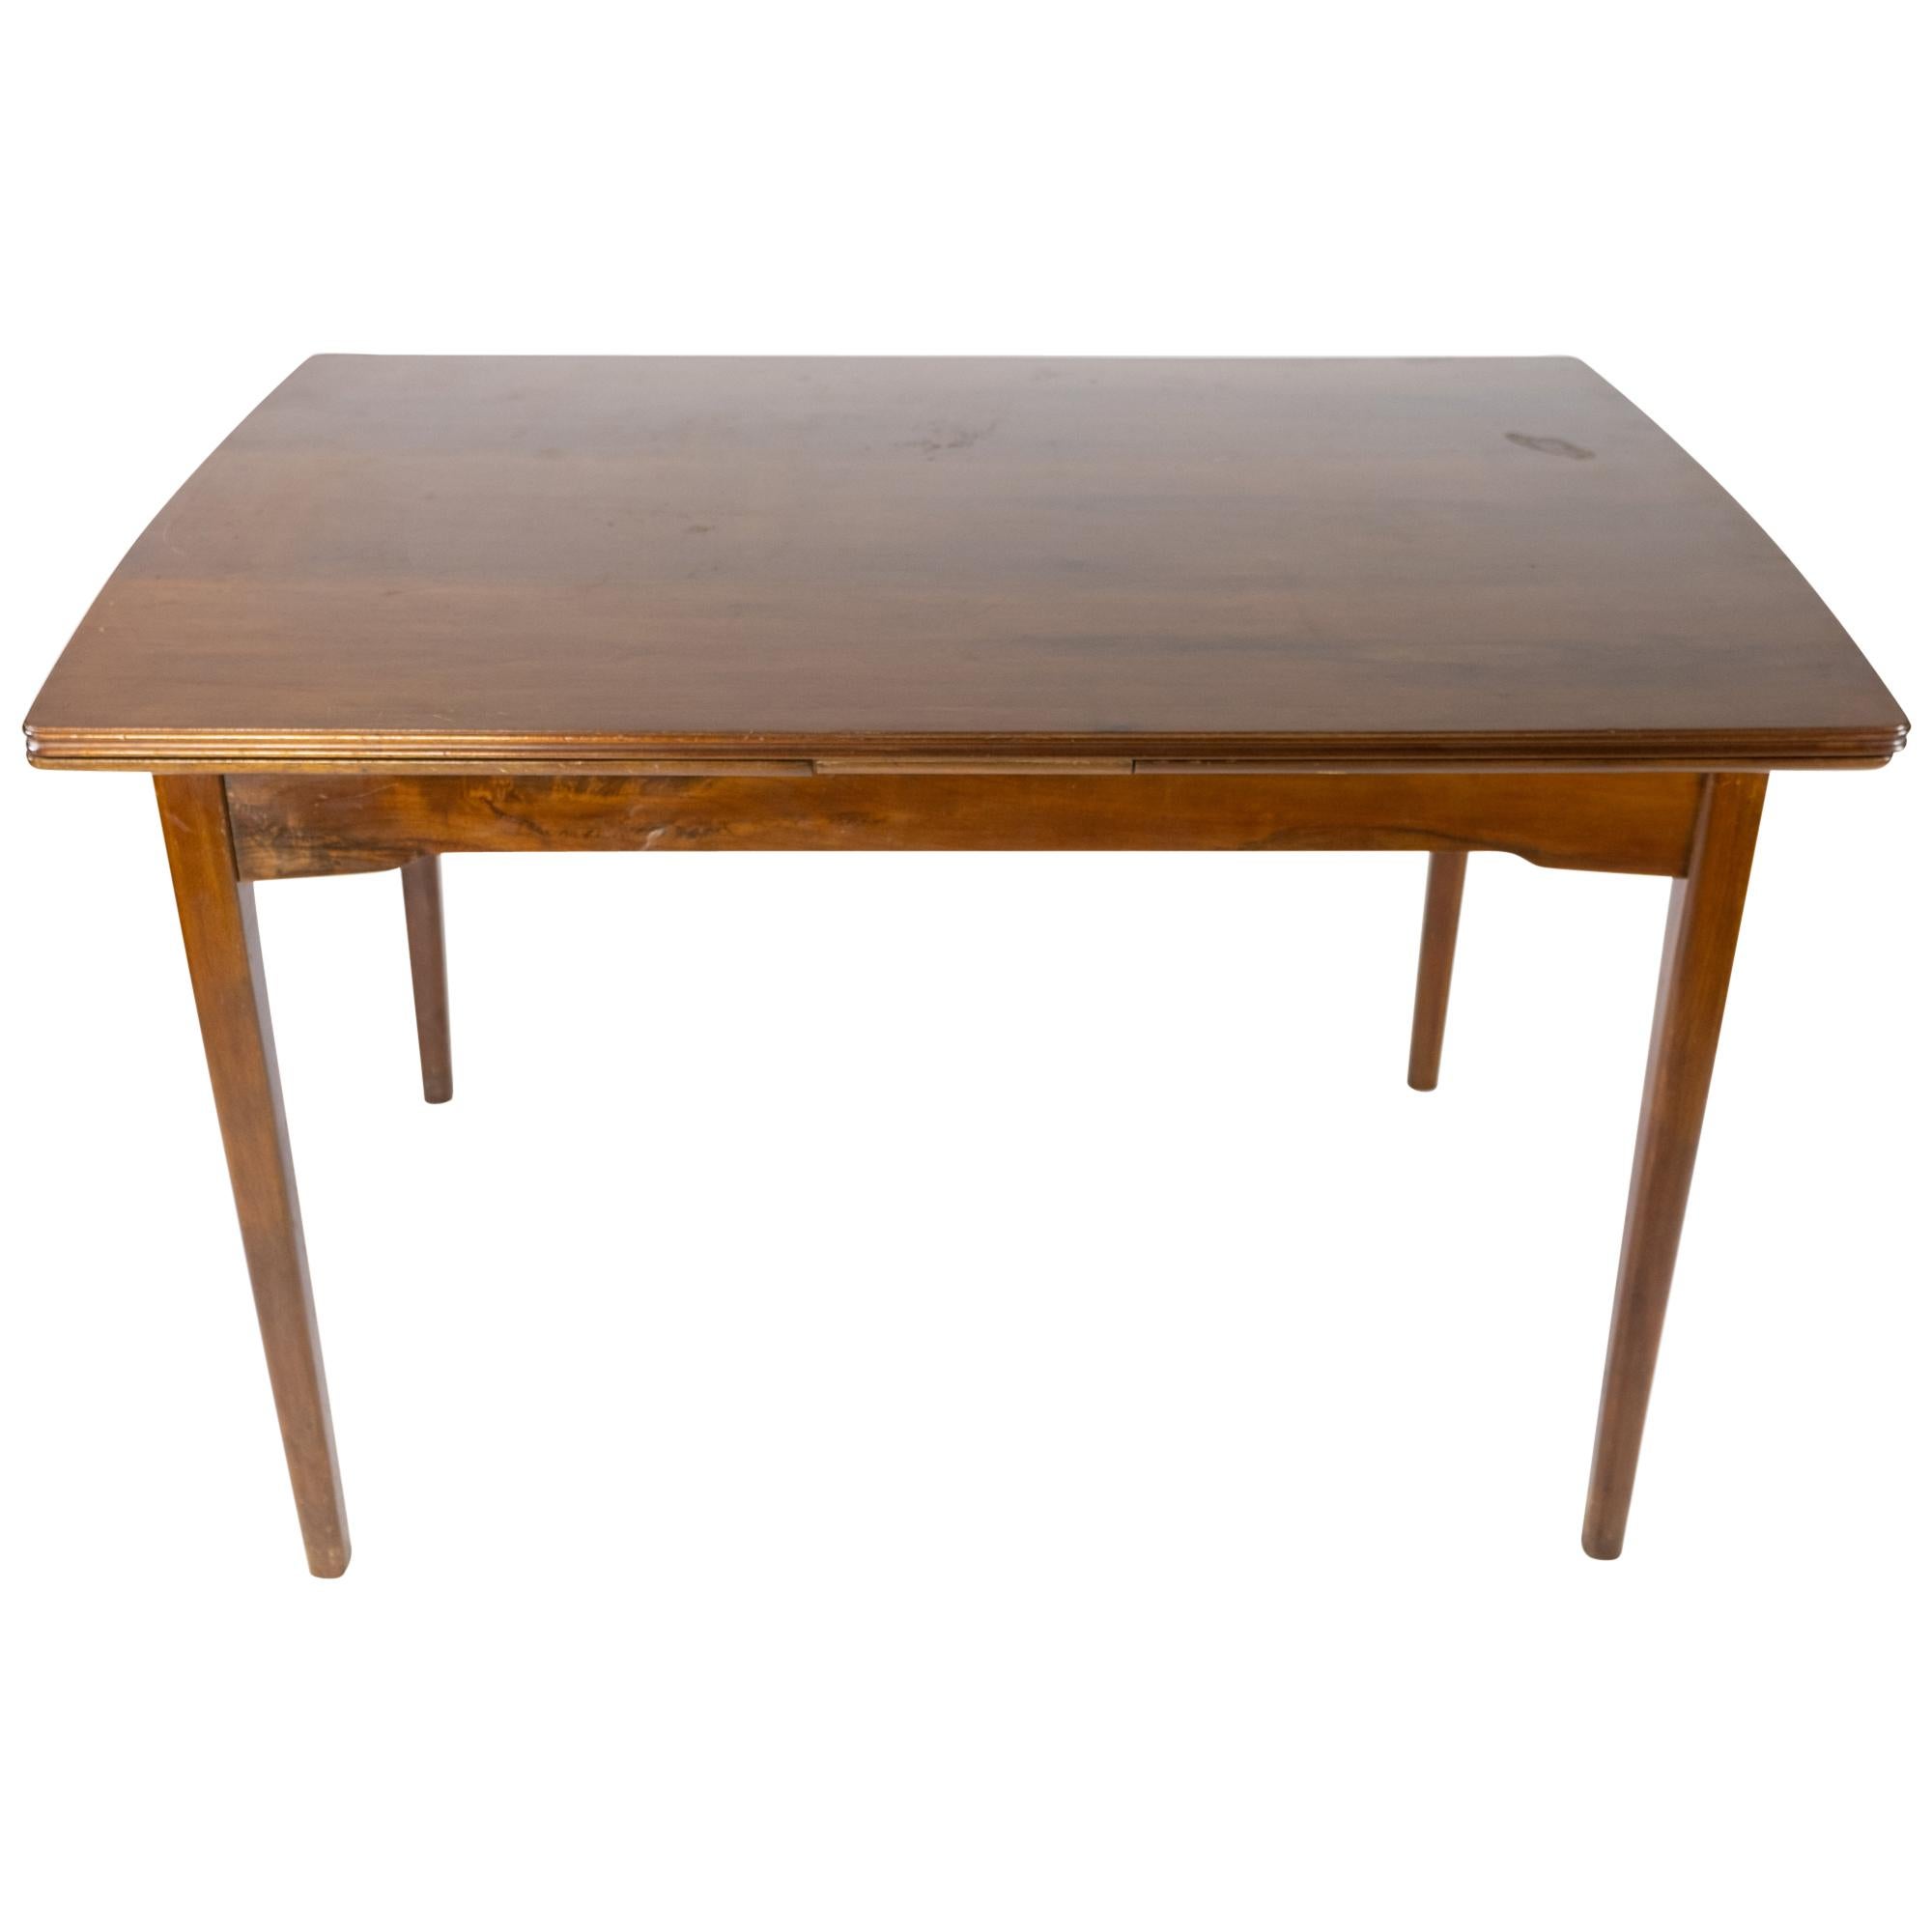 Dining Table in Walnut with Extension of Danish Design from the 1960s